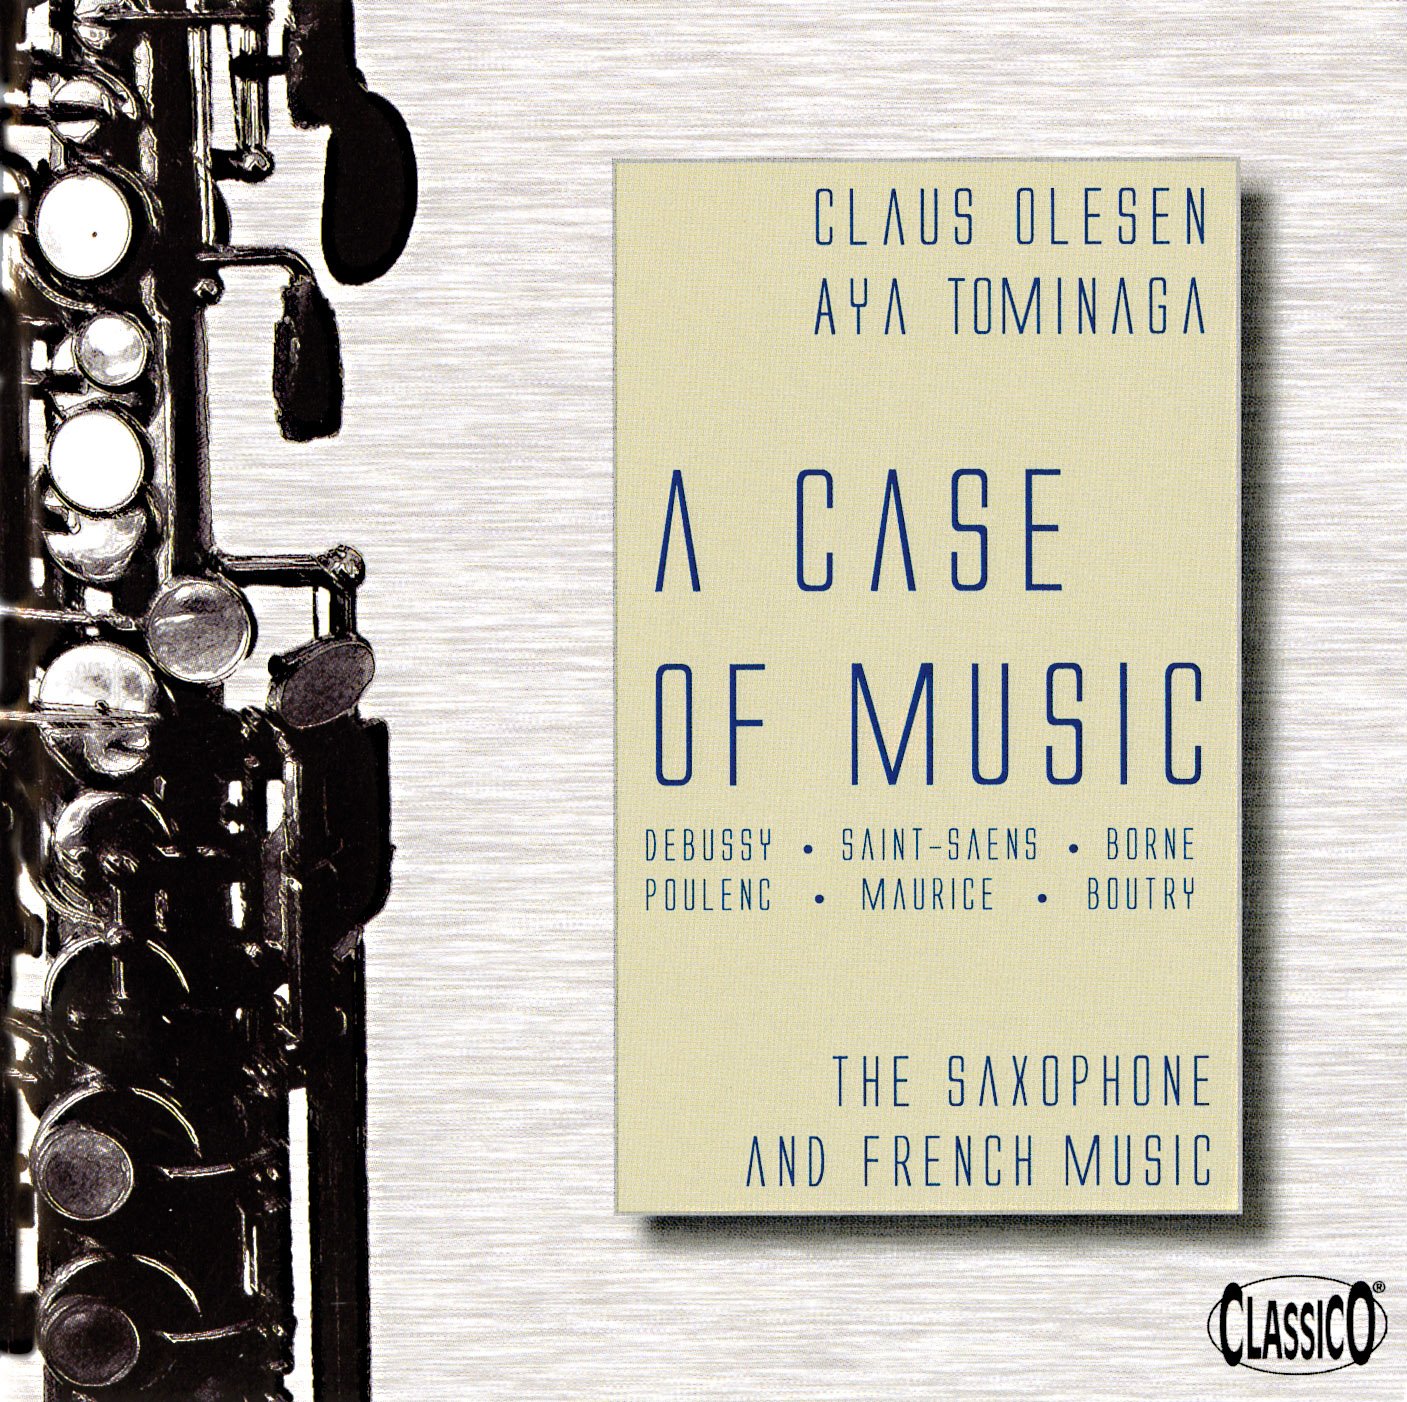 A CASE OF MUSIC - The Saxophone and French Music